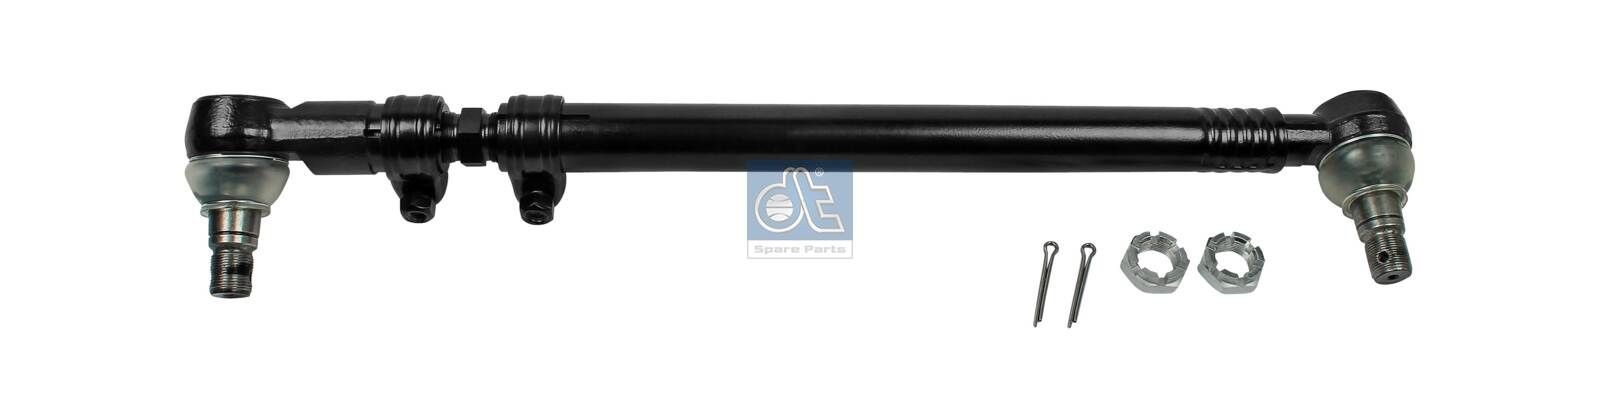 DT Spare Parts 4.65666 Rod Assembly 627 330 02 03